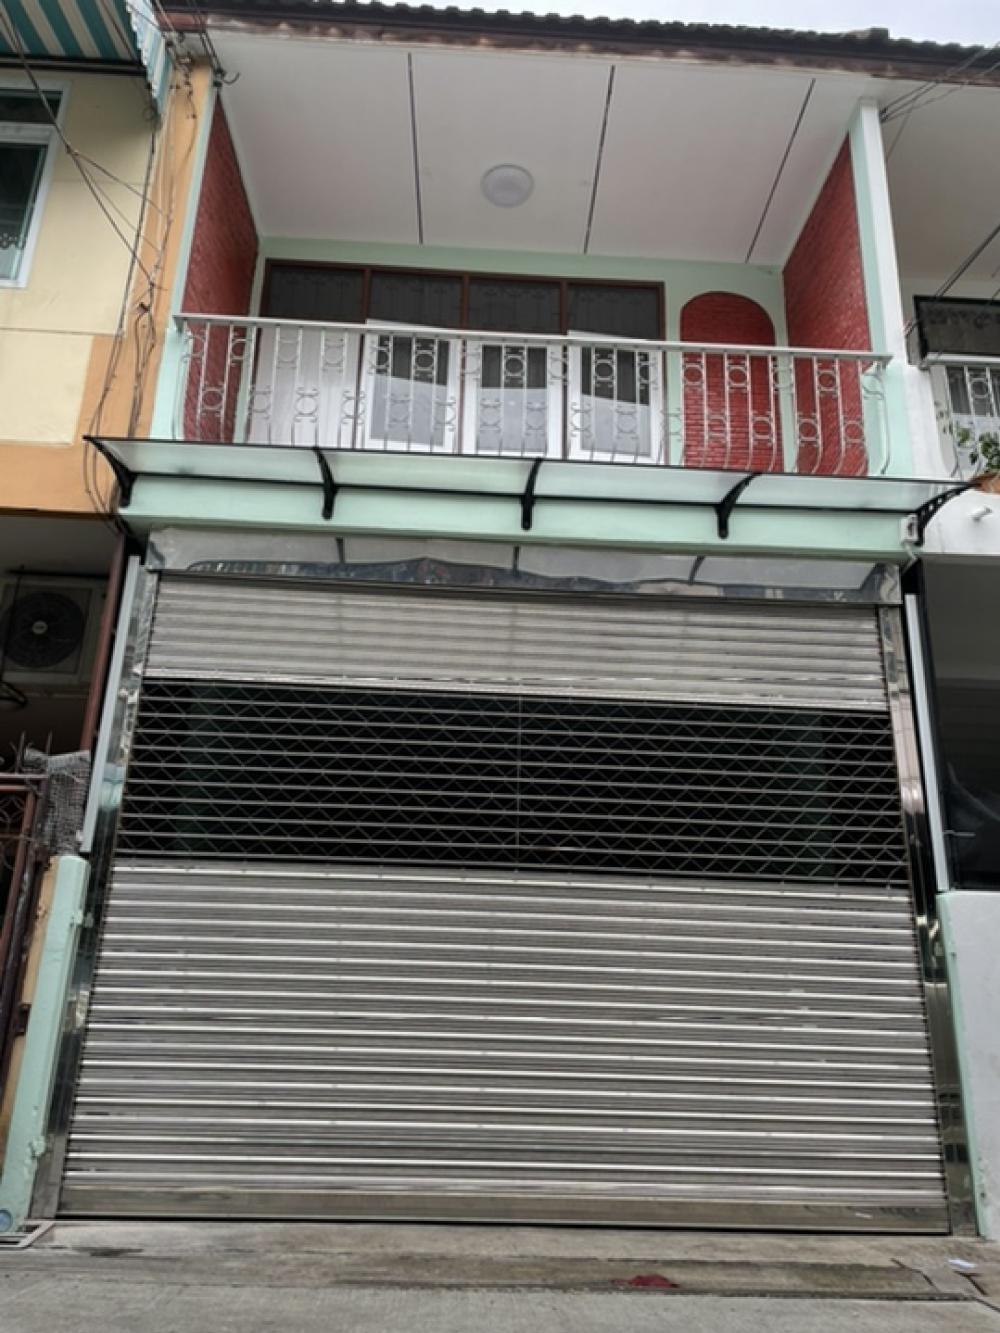 For RentTownhouseBang Sue, Wong Sawang, Tao Pun : For rent, 2-story townhouse on the Purple Line (Tao Poon), size 16 square meters, 1 bedroom, 1 bathroom, parking for 1 car.